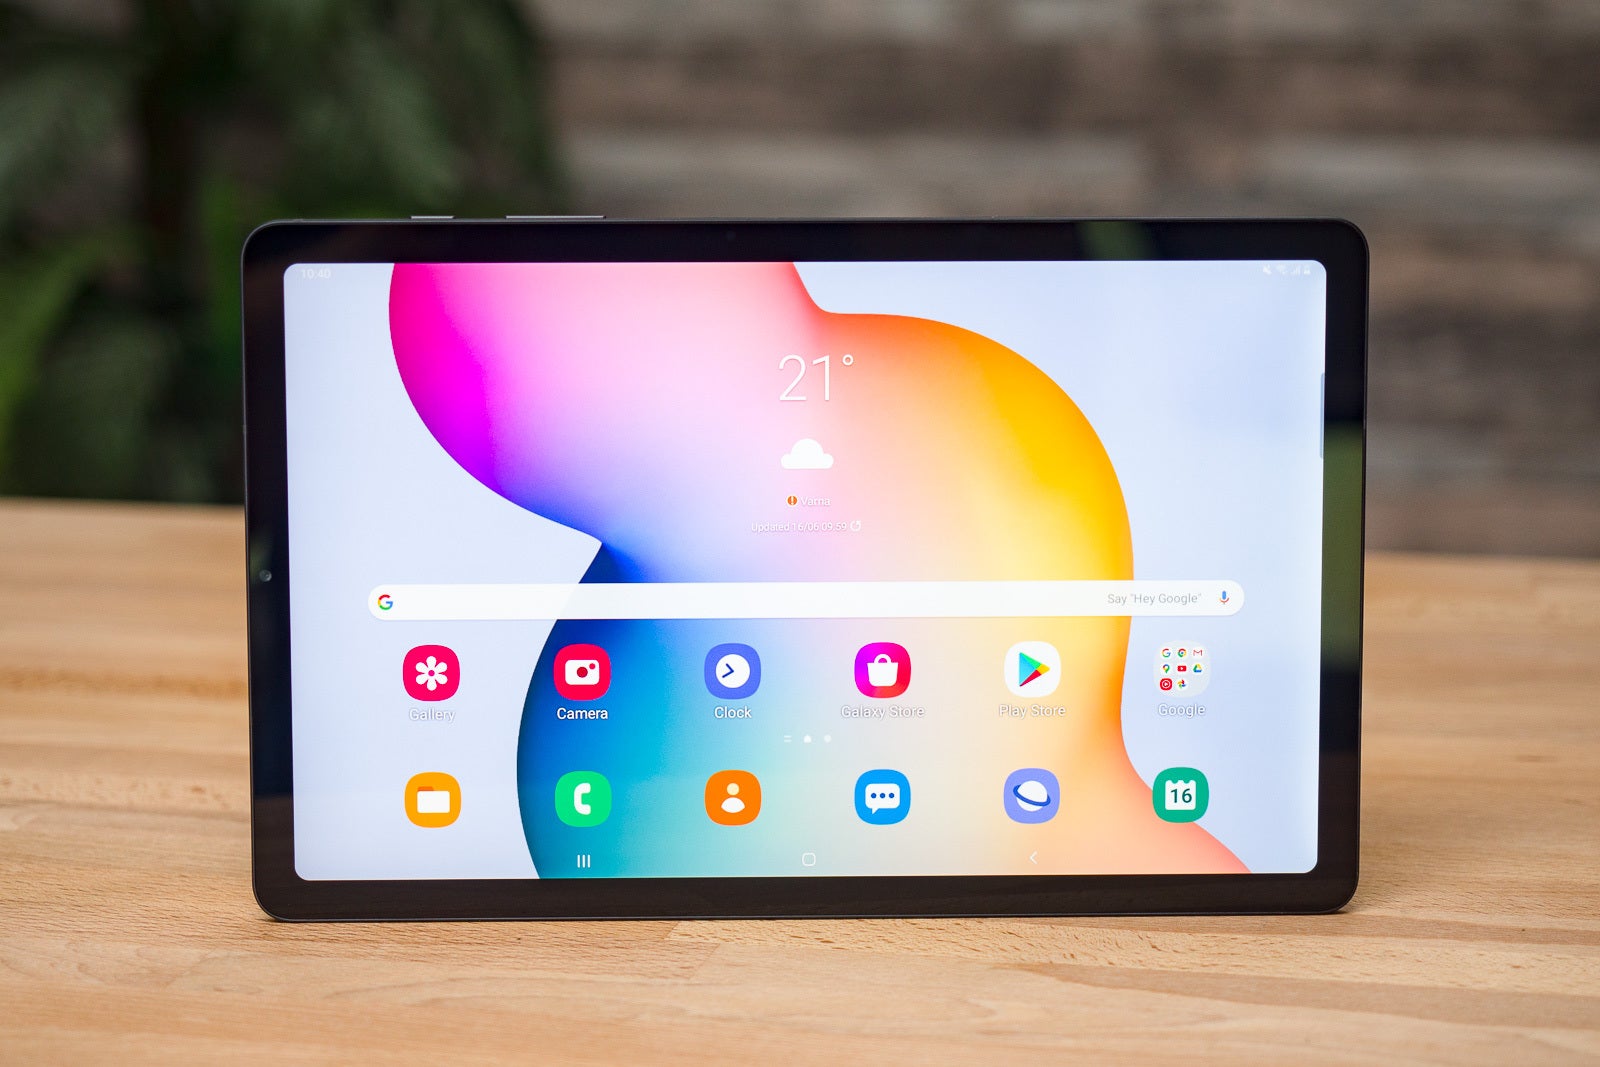 Samsung Galaxy Tab S7 Lite release date, price, features and news